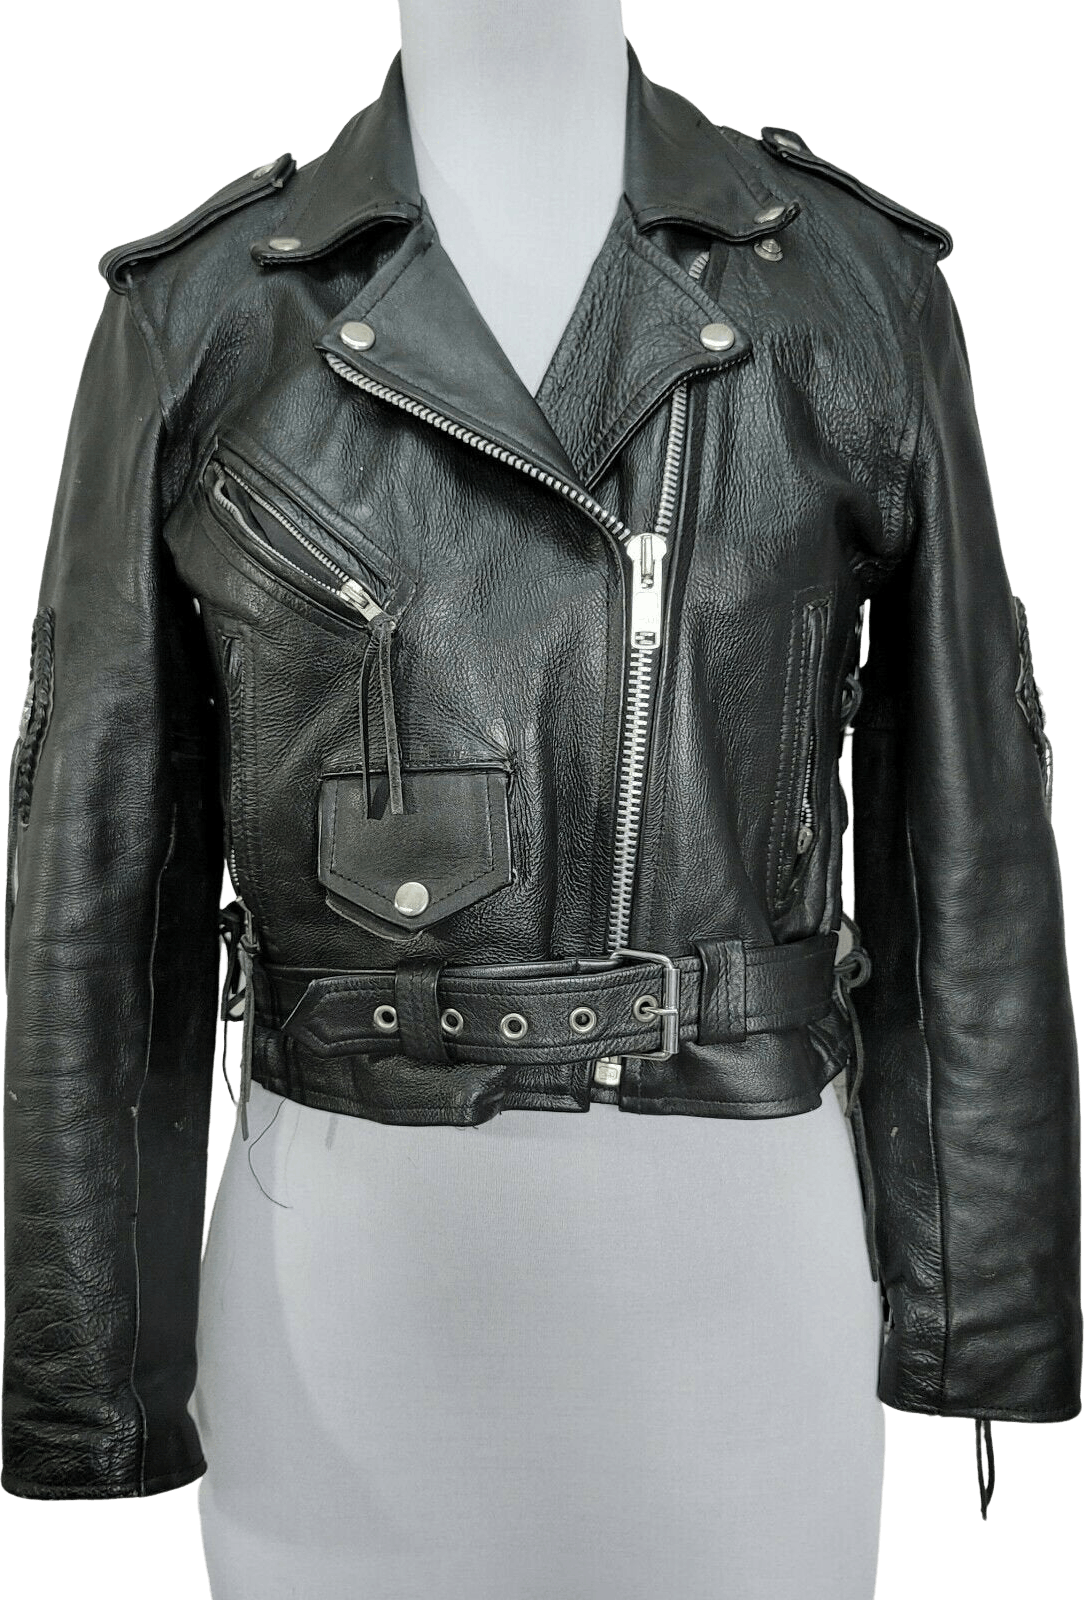 Vintage 90's Black Leather Motorcycle Jacket with Fringe and Silvertone ...